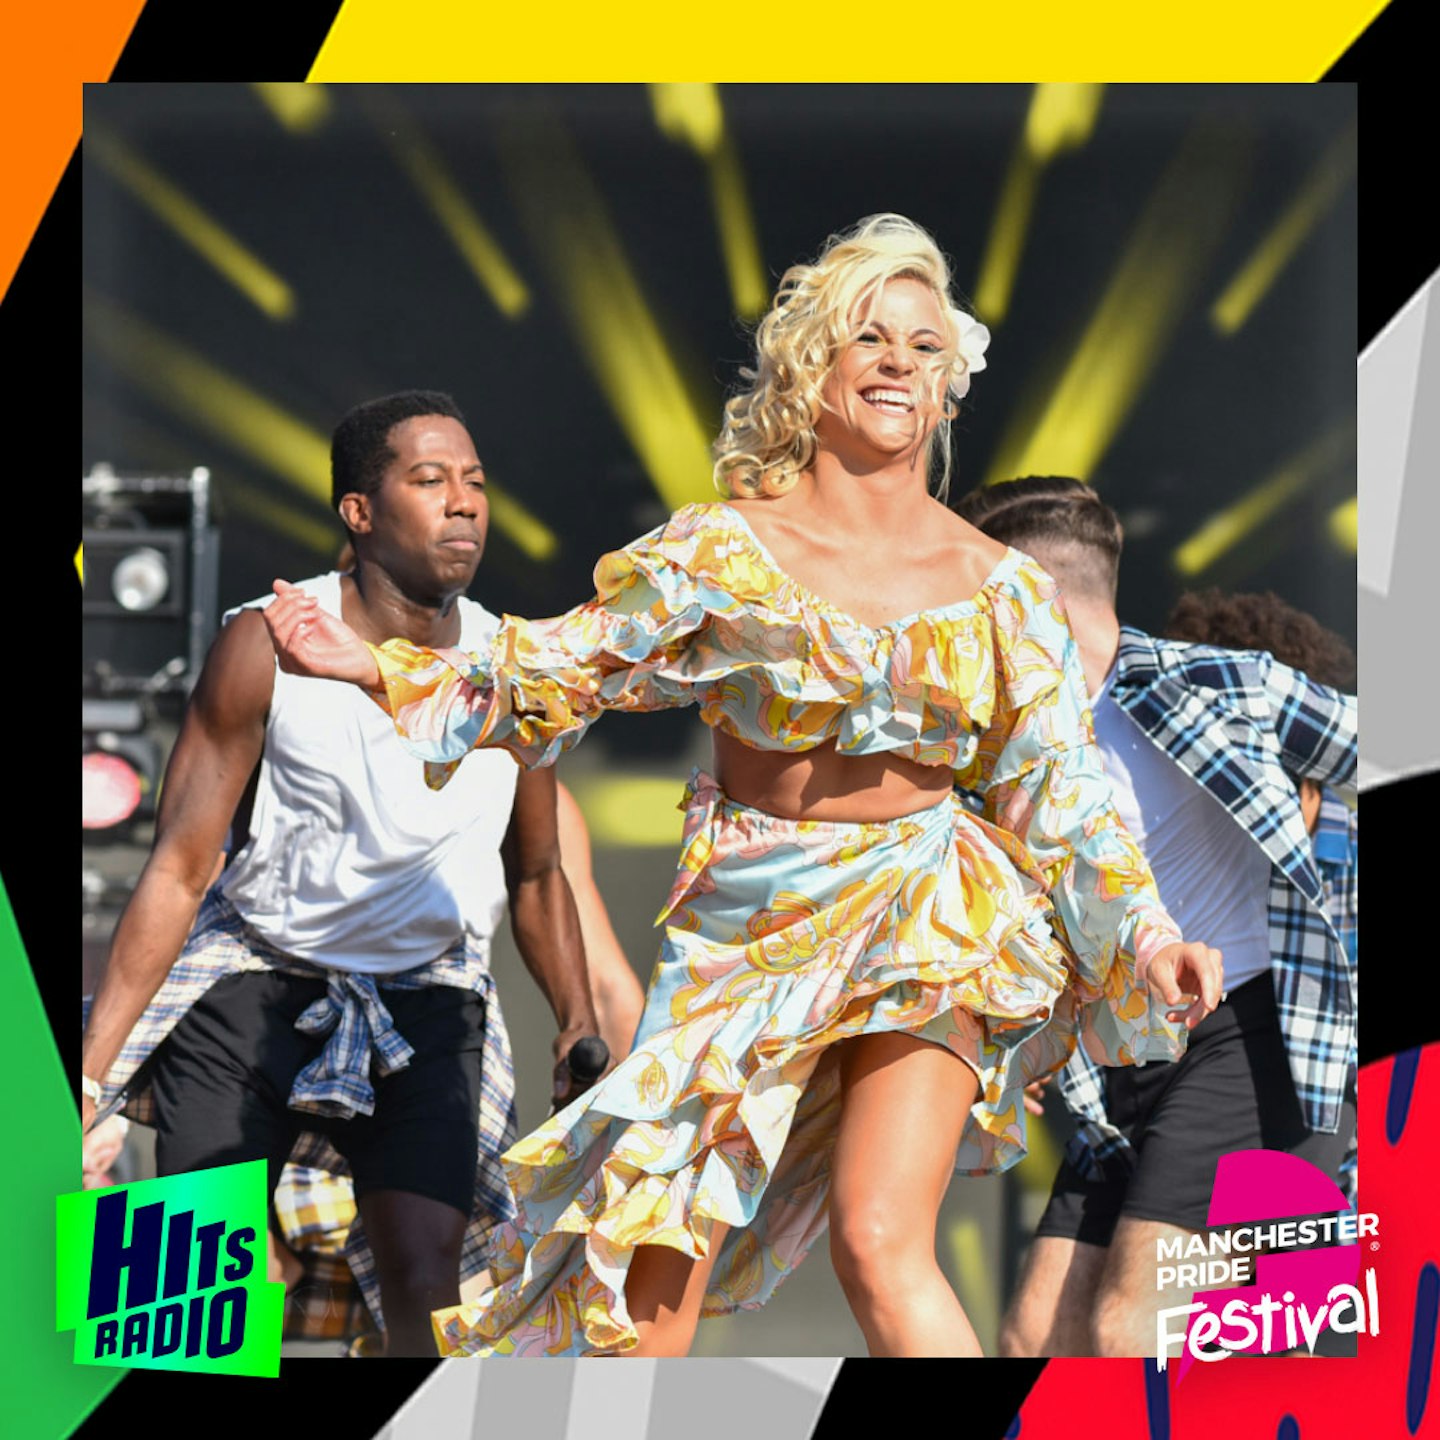 Pixie Lott performing at Manchester Pride 2019